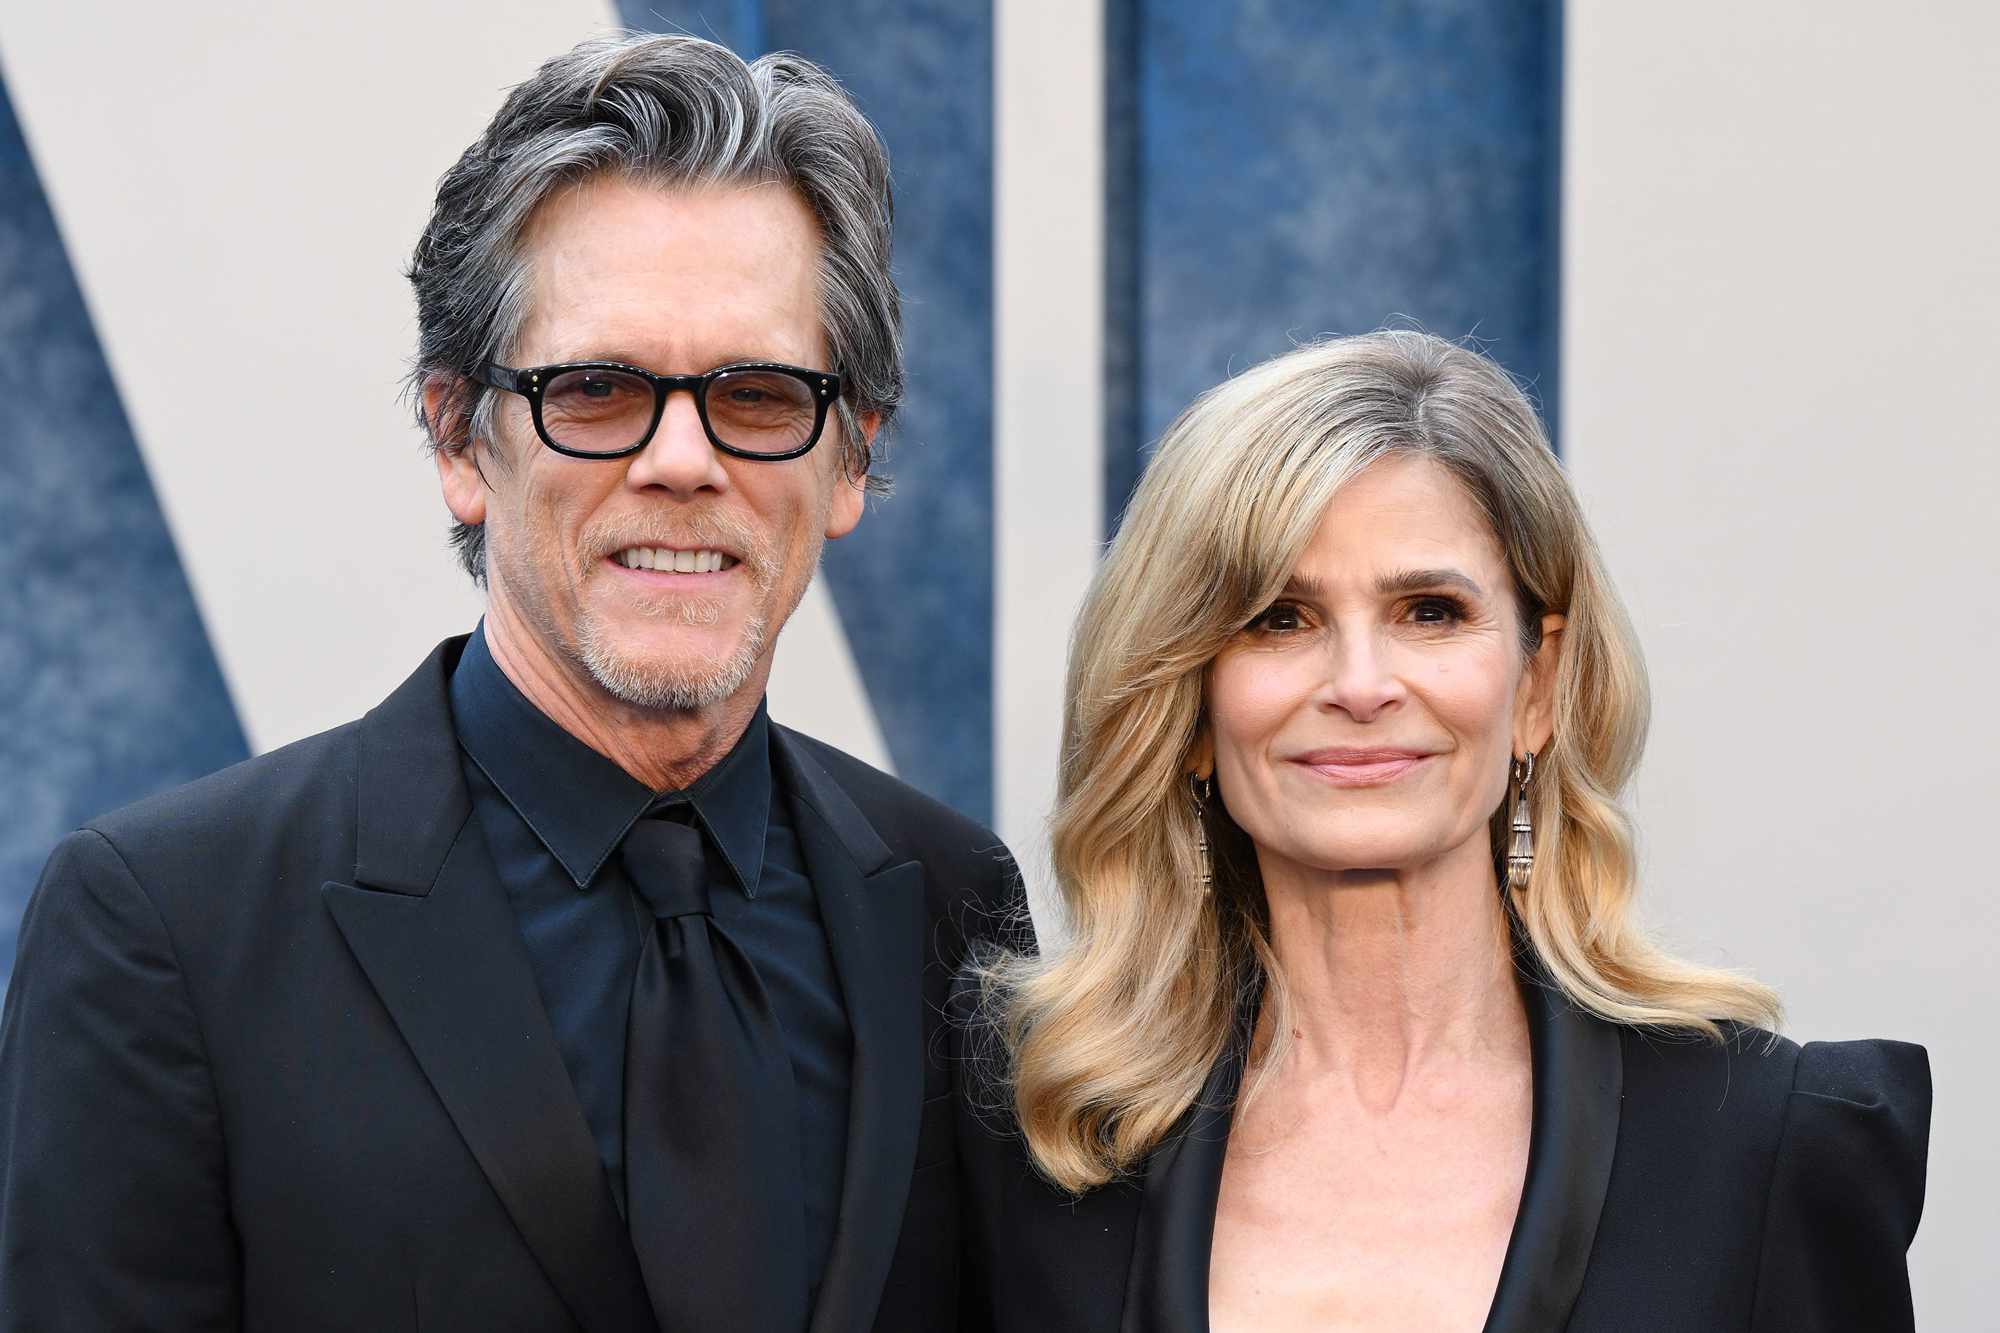 Kevin Bacon and Kyra Sedgwick Perform the Couple's Dictionary Trend with Adorable Results